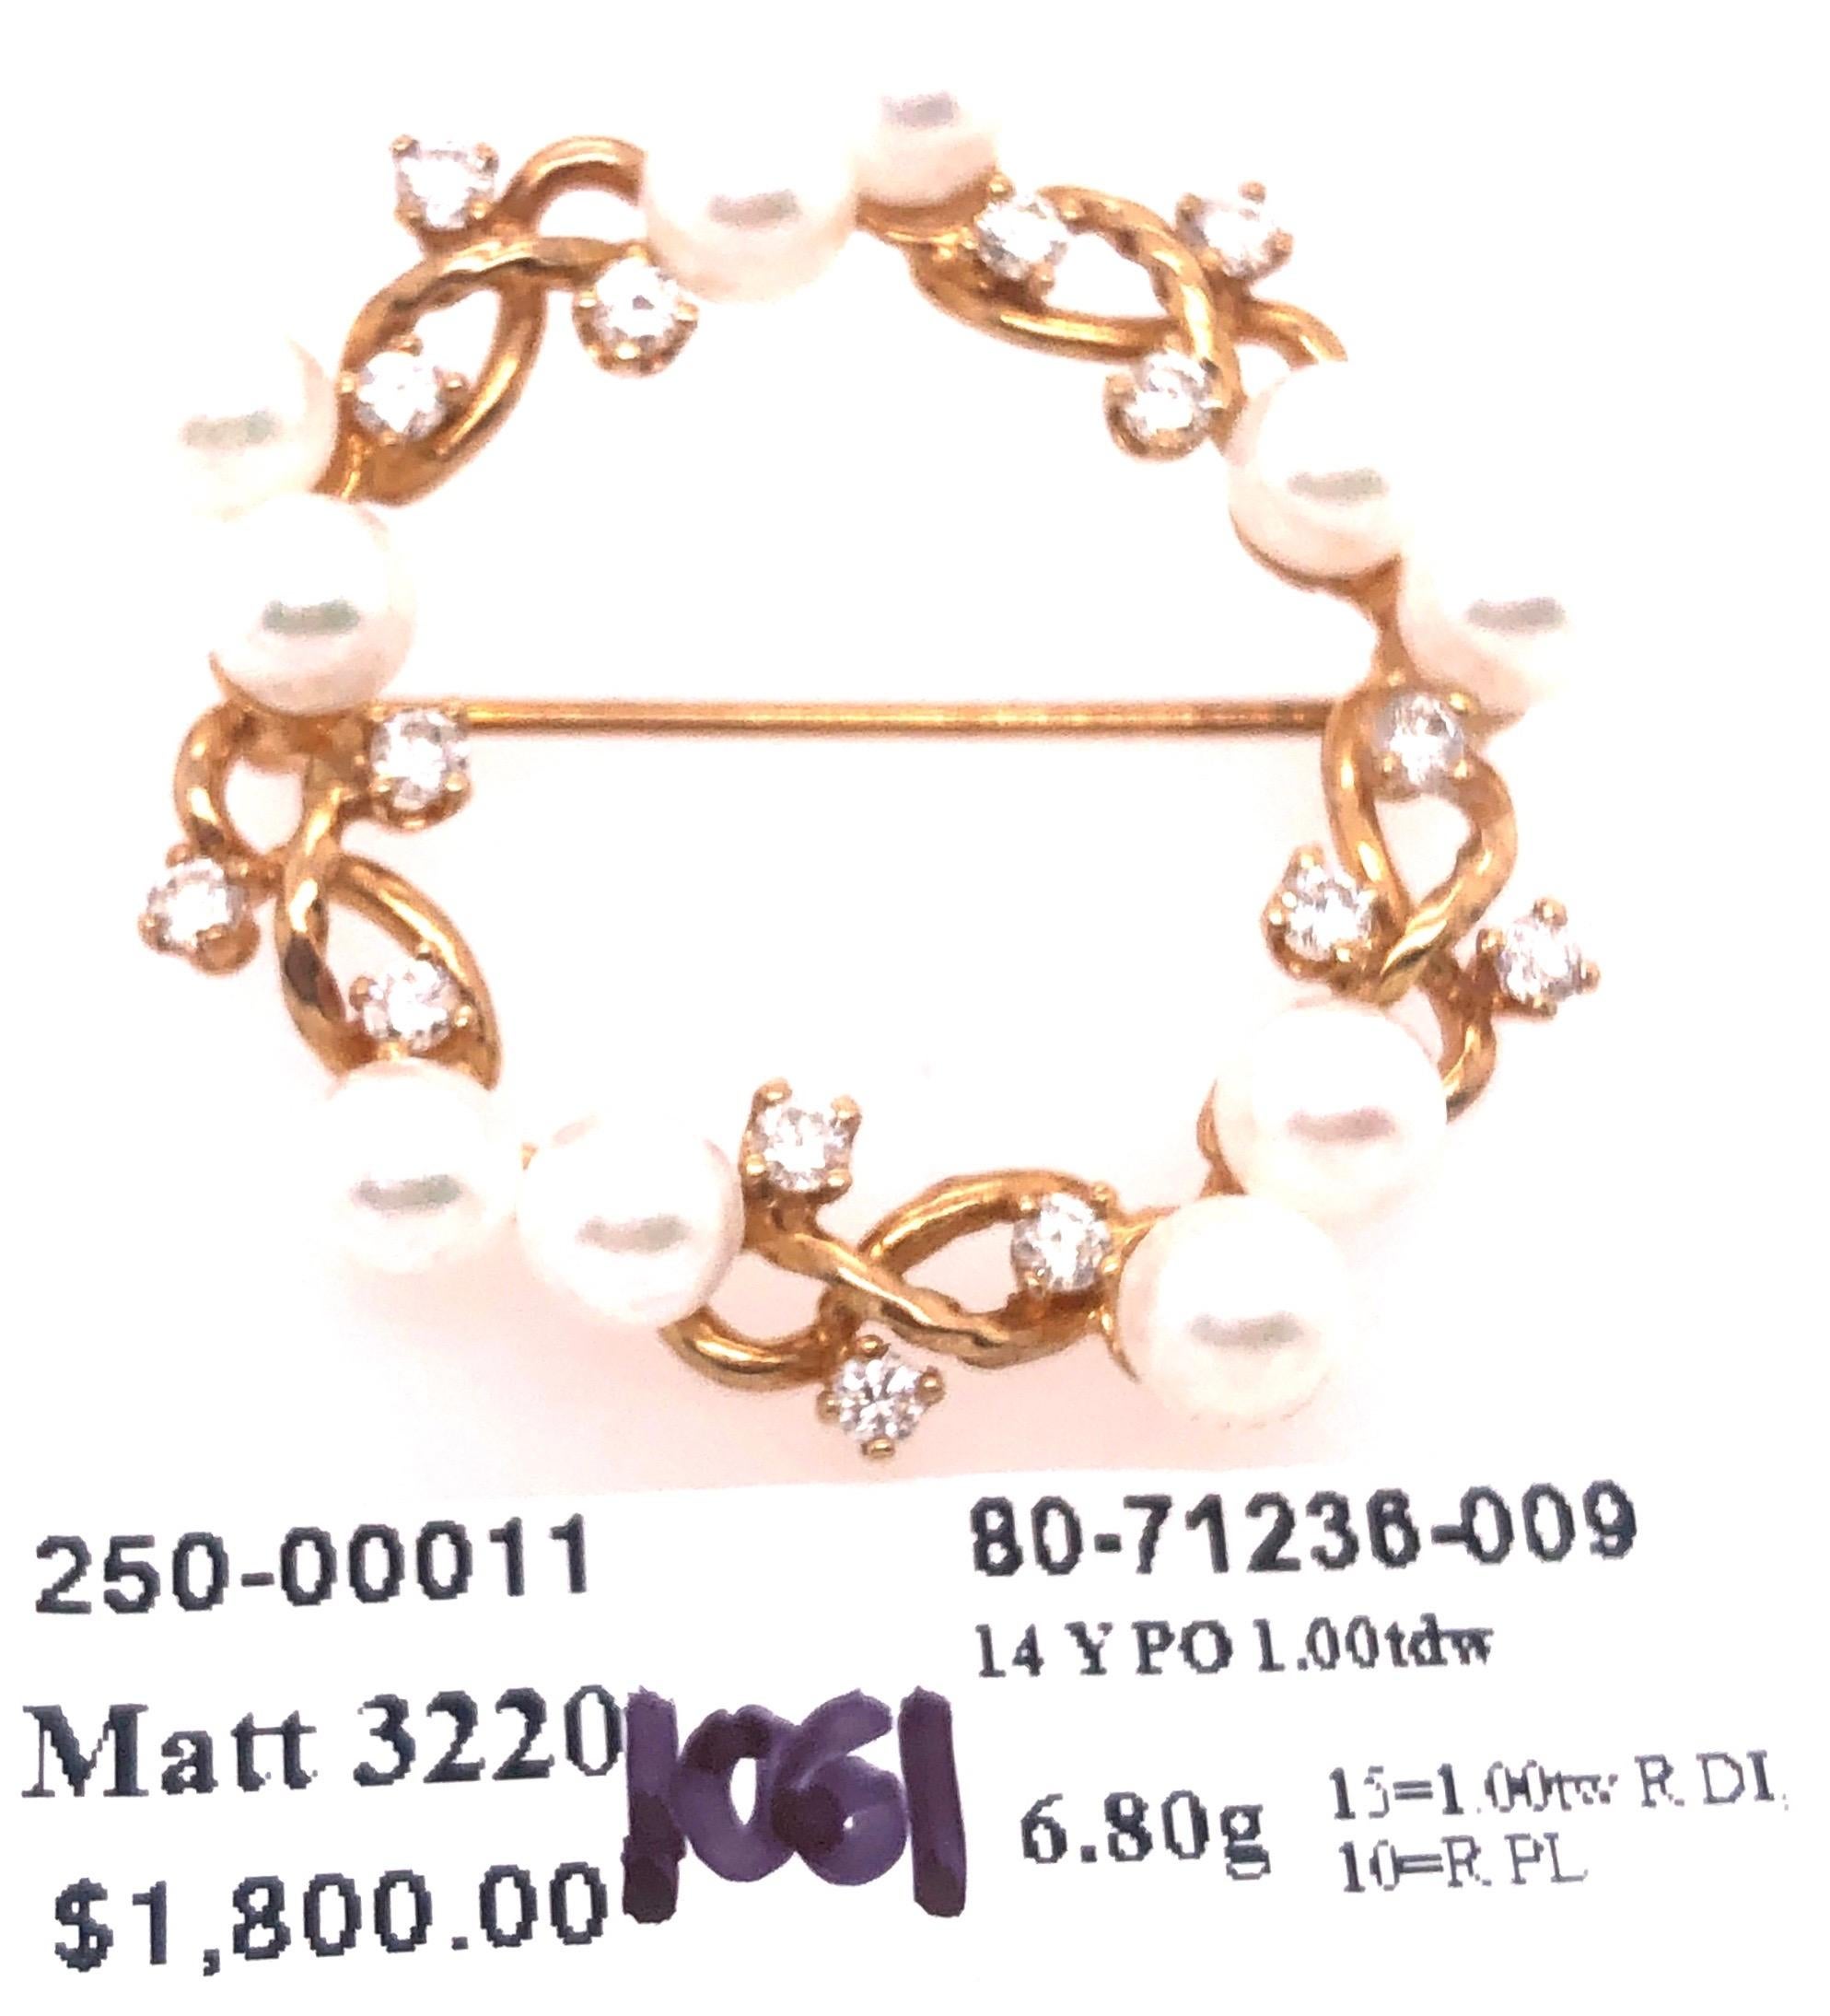 14 Karat Yellow Gold Diamond and Pearl Circle Brooch For Sale 2